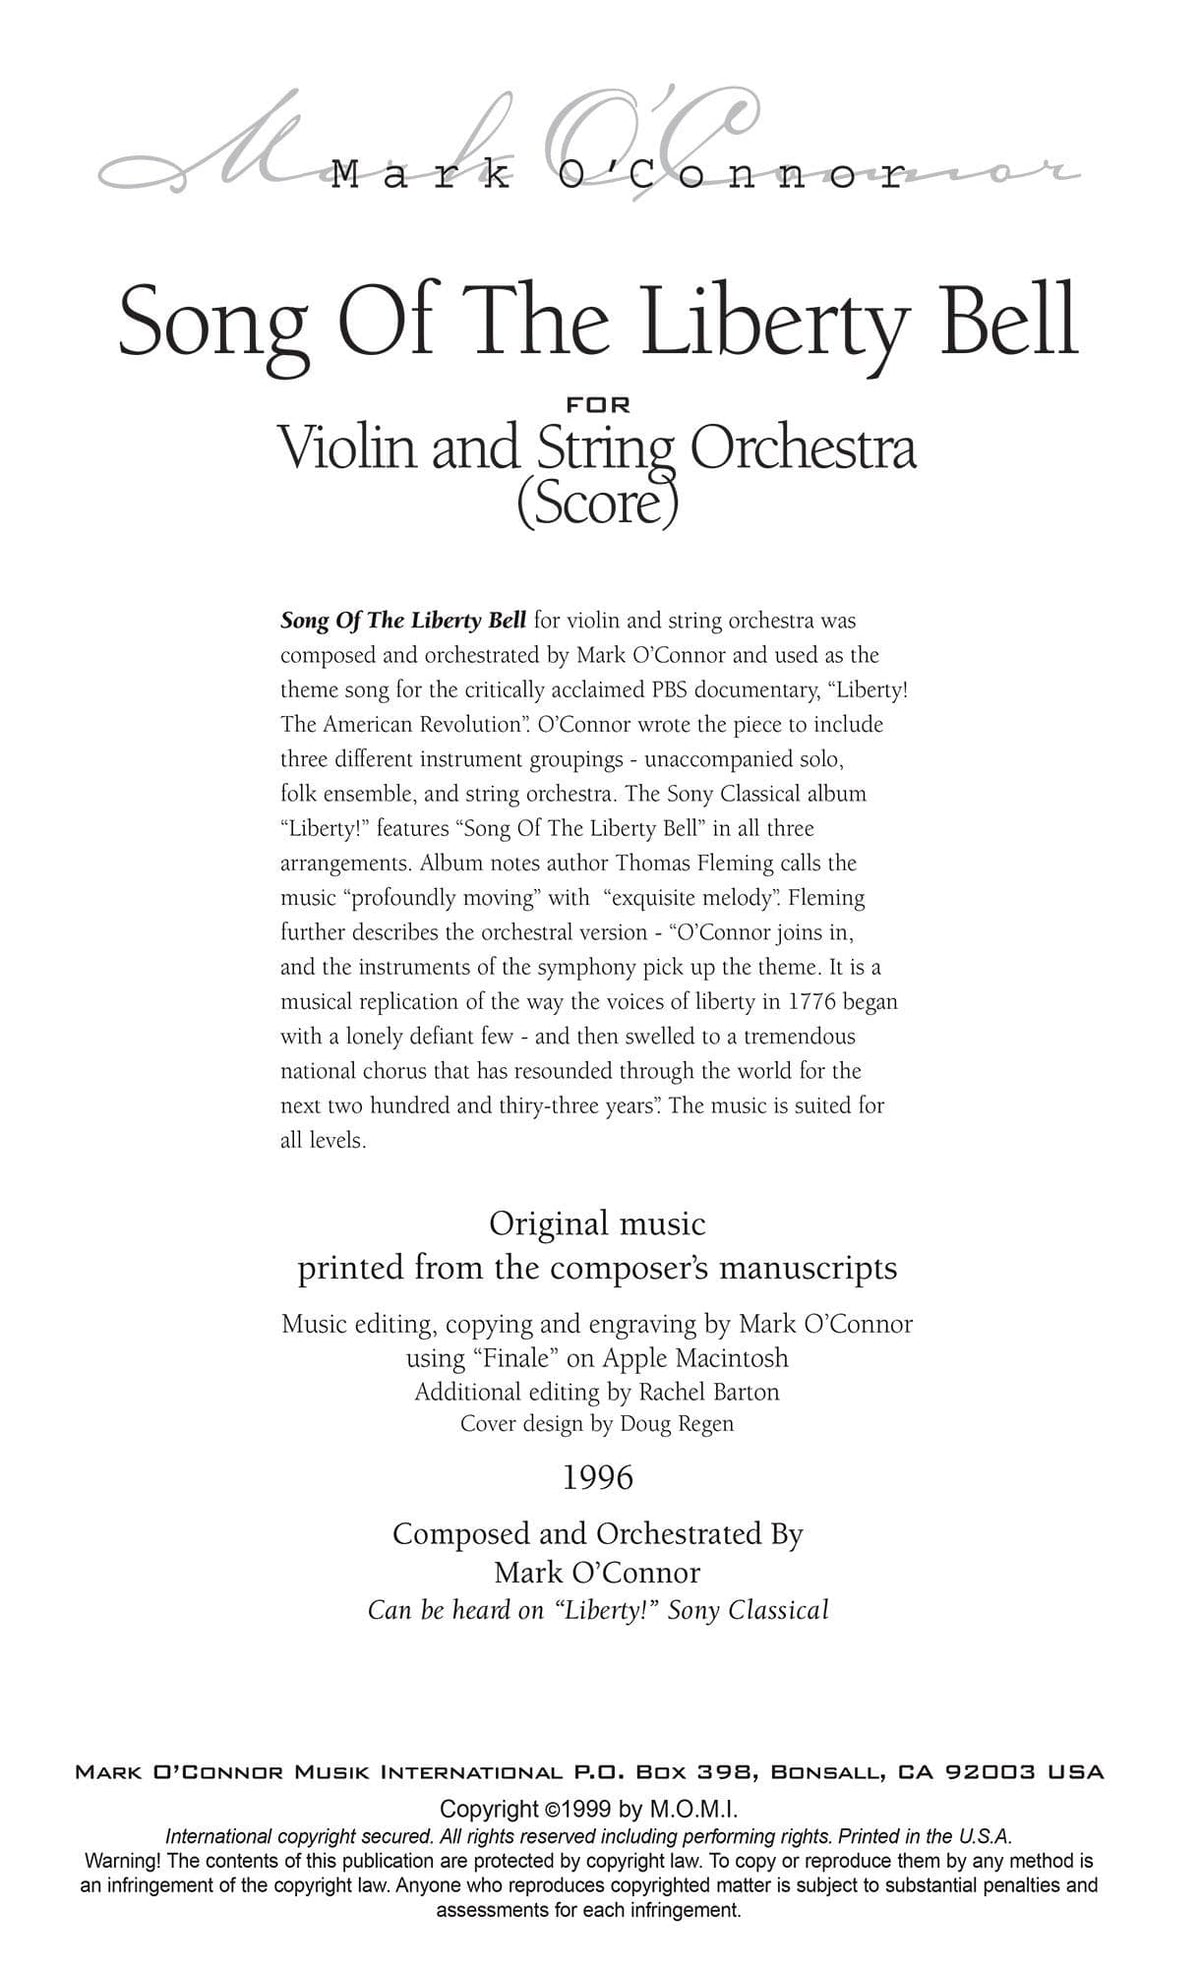 O'Connor, Mark - Song Of The Liberty Bell for Violin and String Orchestra - Score - Digital Download